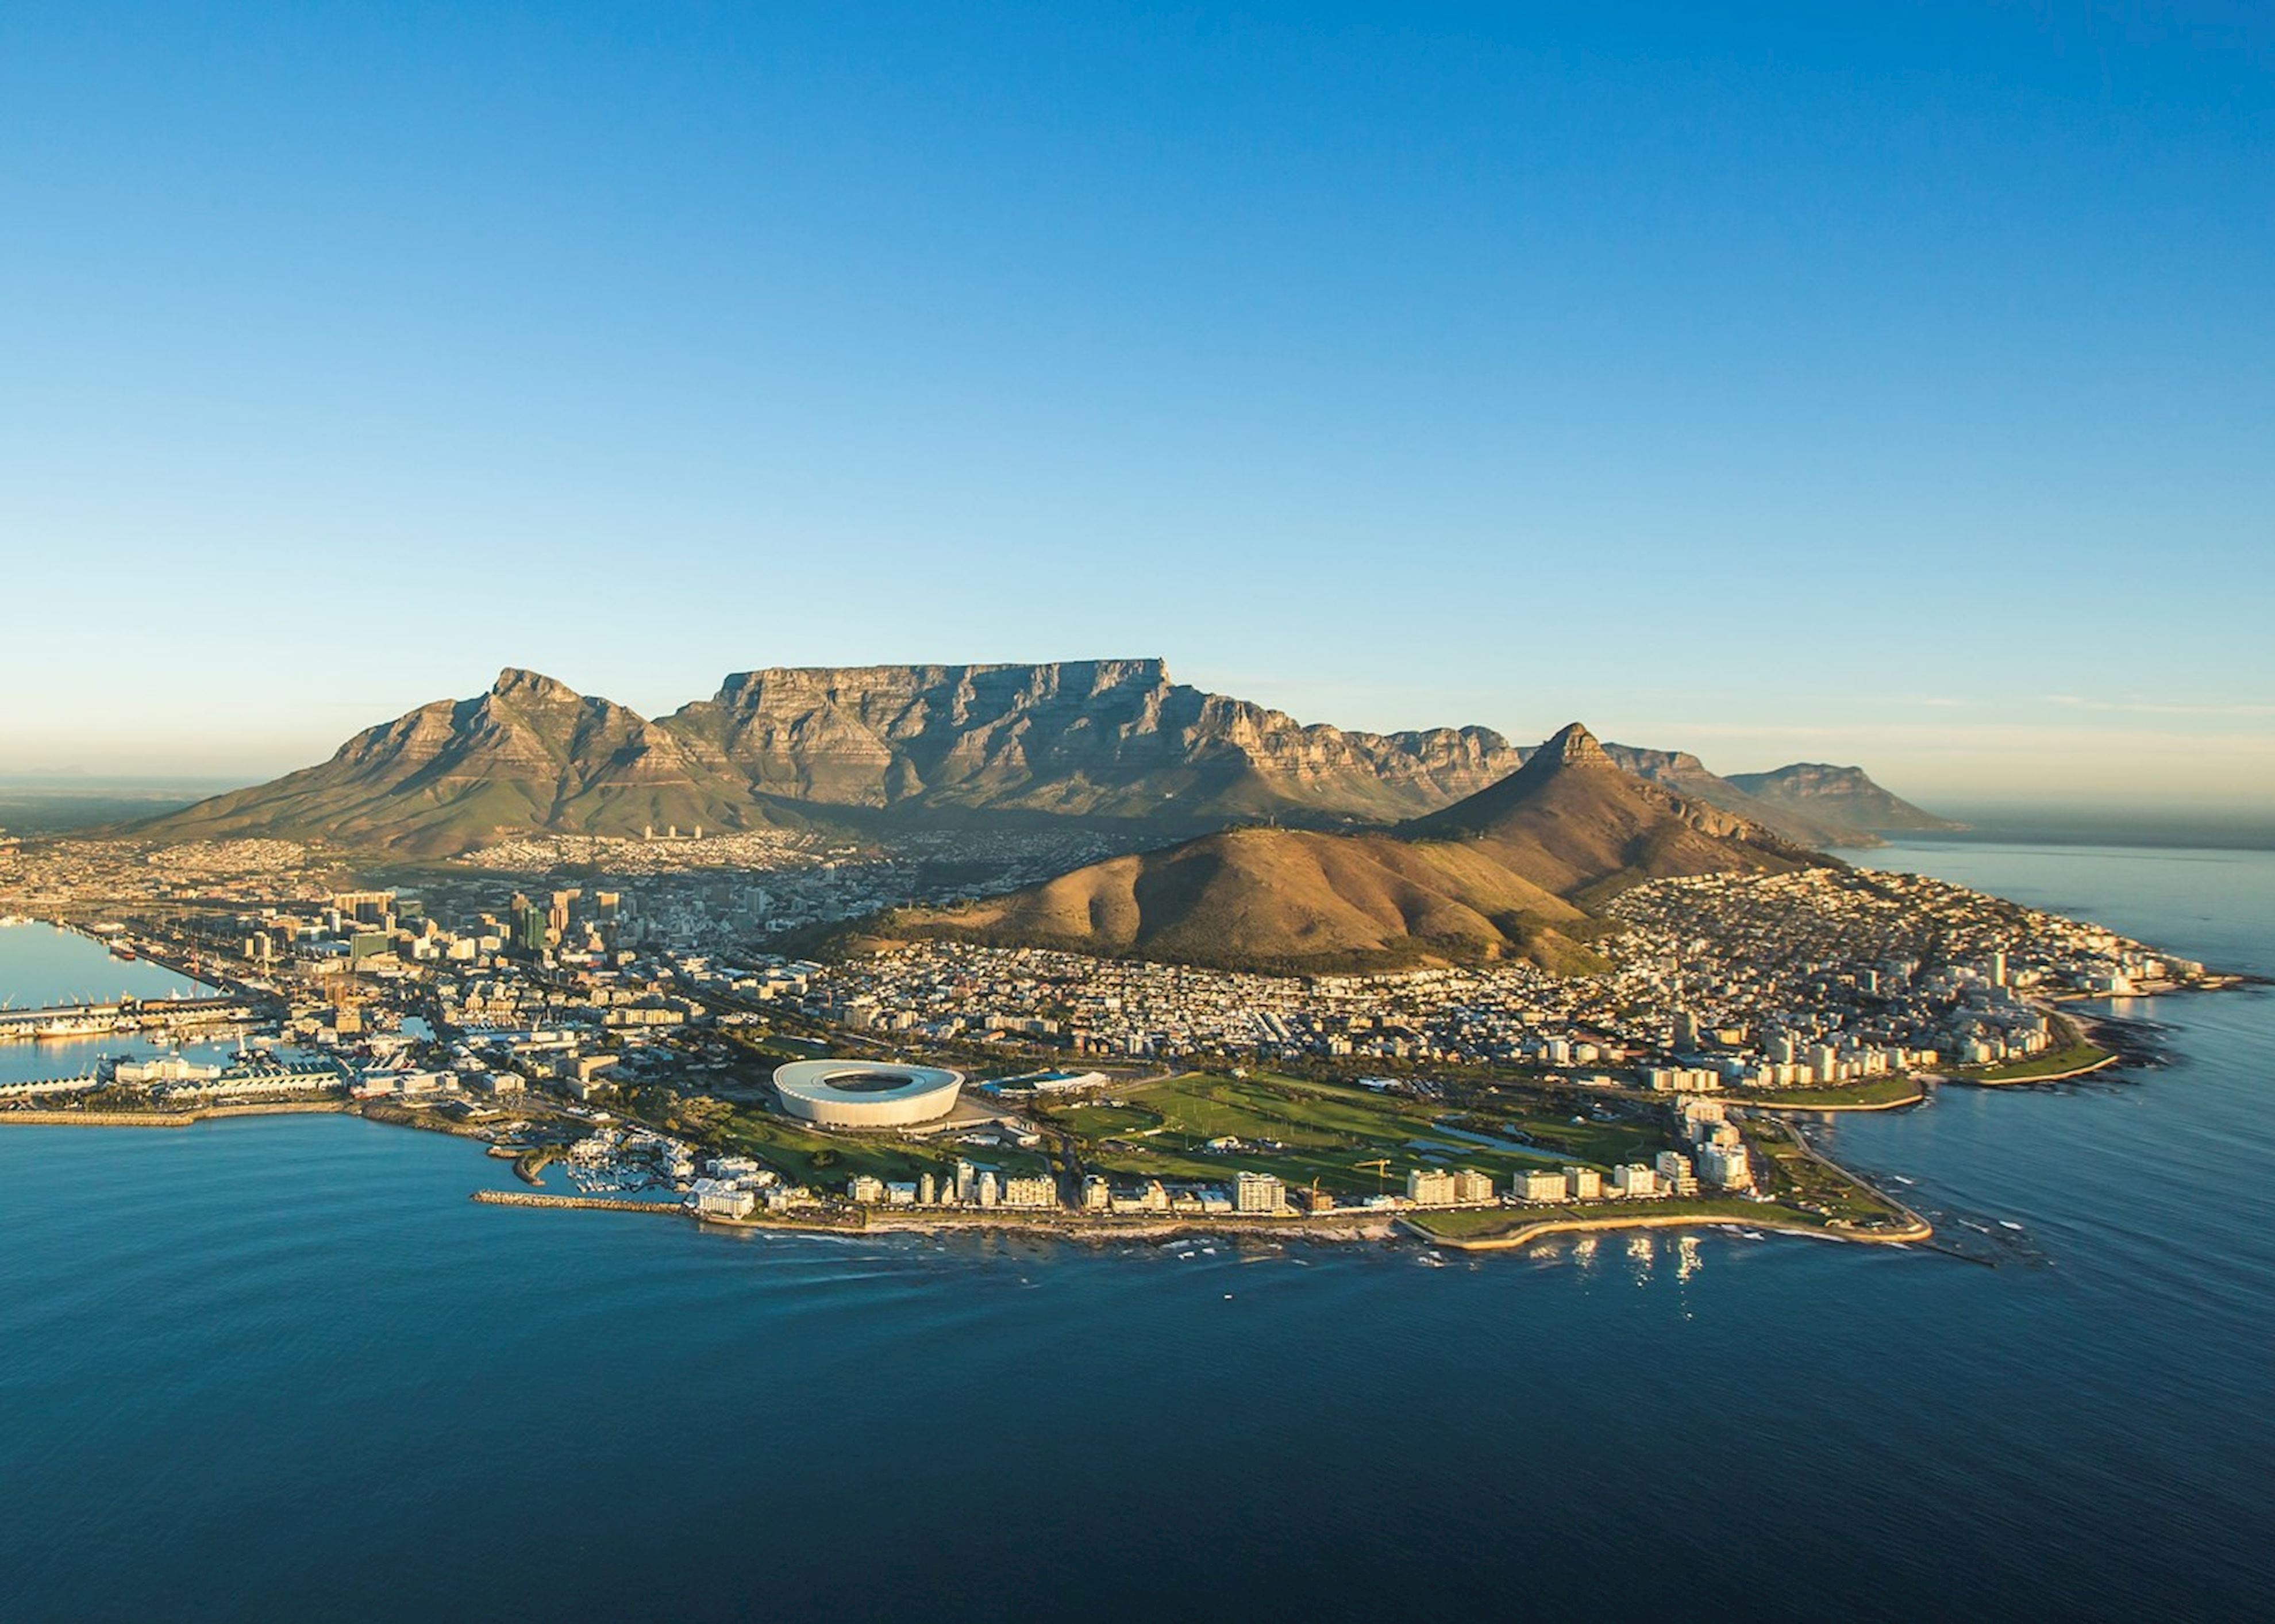 An aerial view of Cape Town with mountains in the backdrop